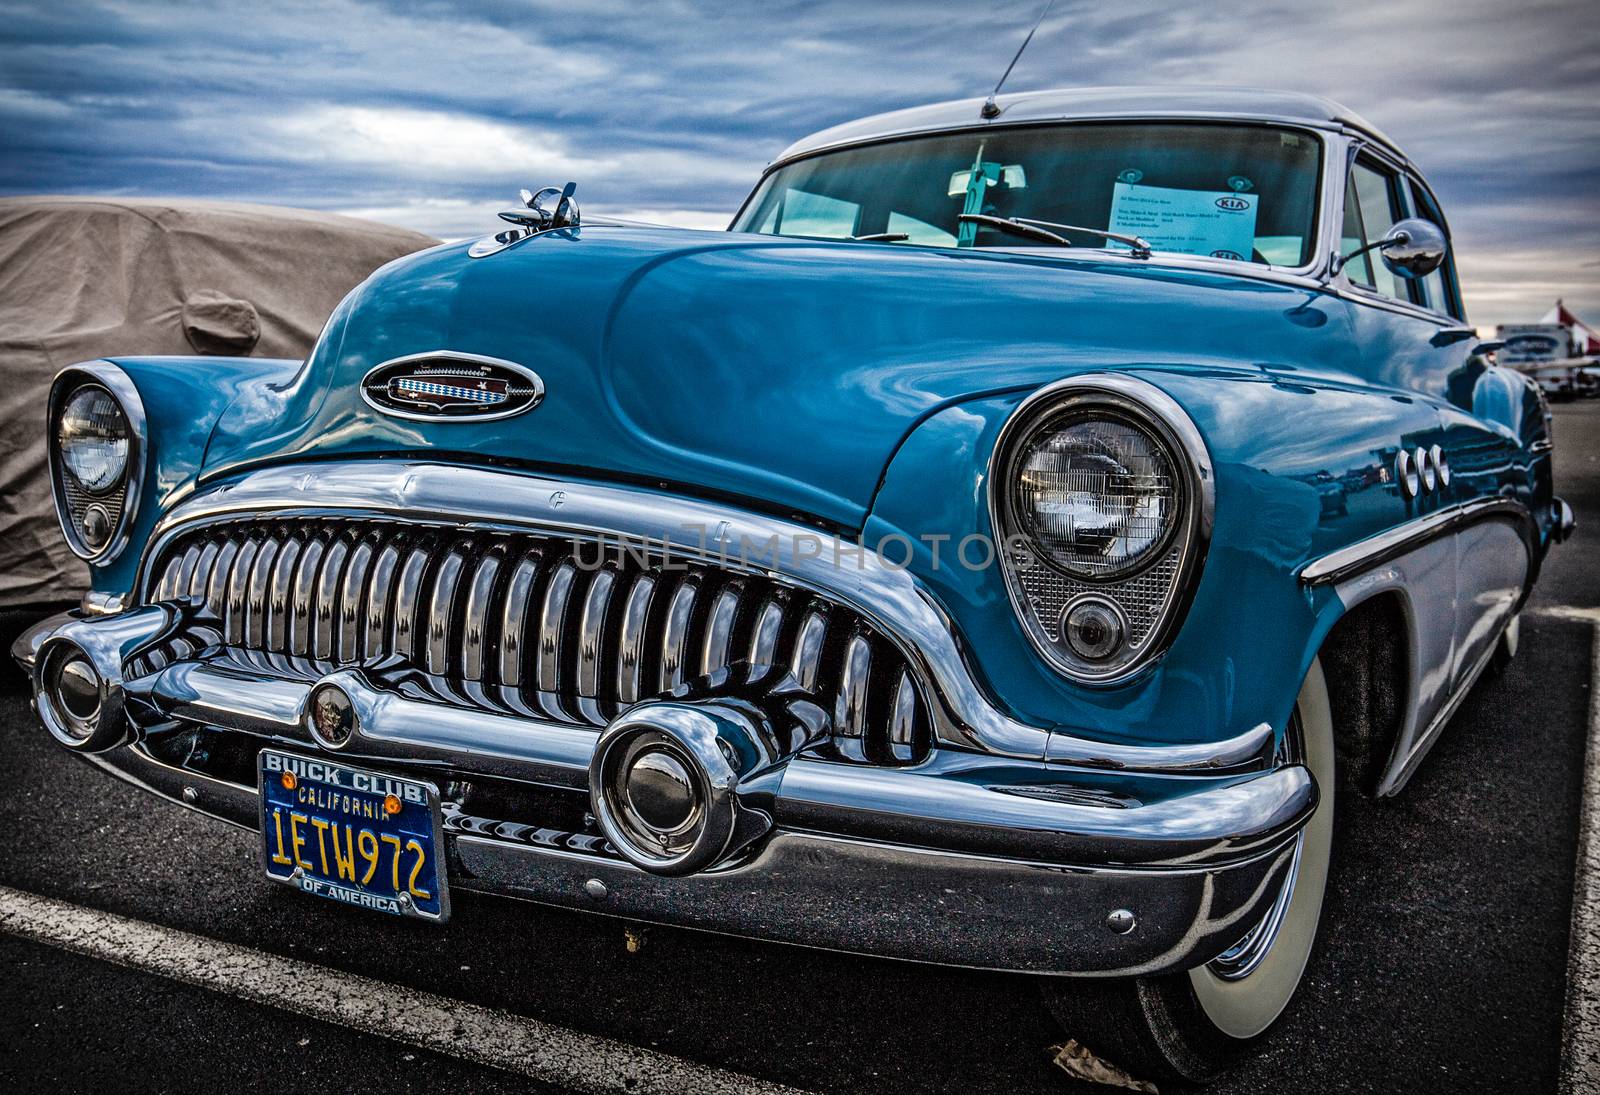 Redding, California, USA-September 28, 2014: A restored 1950's era Buick Skylark is on display at a car show in Redding and shows off it's unique chrome grill and blue paint.